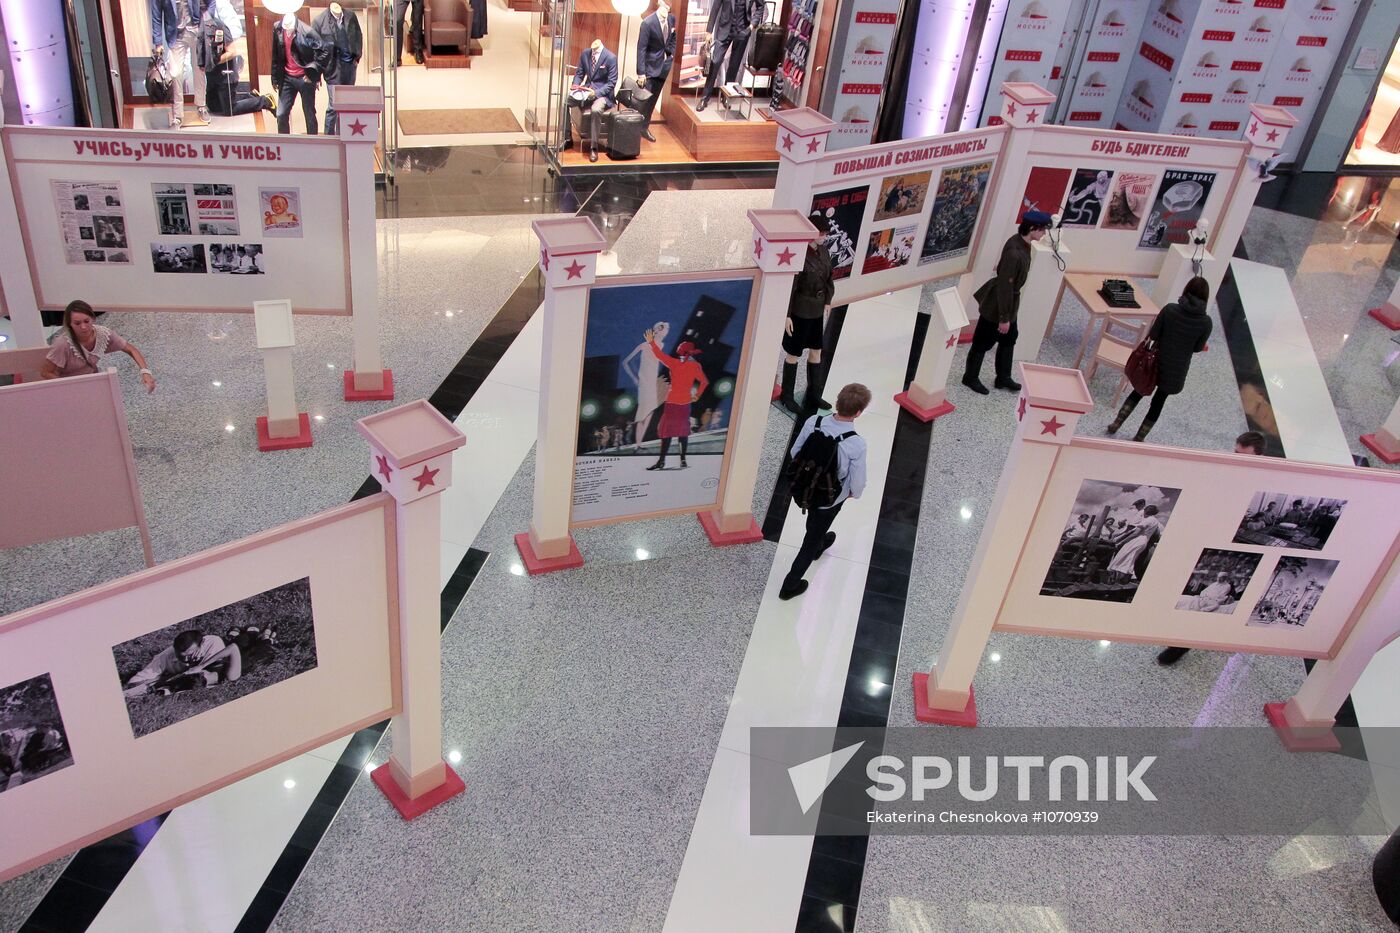 Exhibition "The Age of the Bright Tomorrow" opens in Moscow